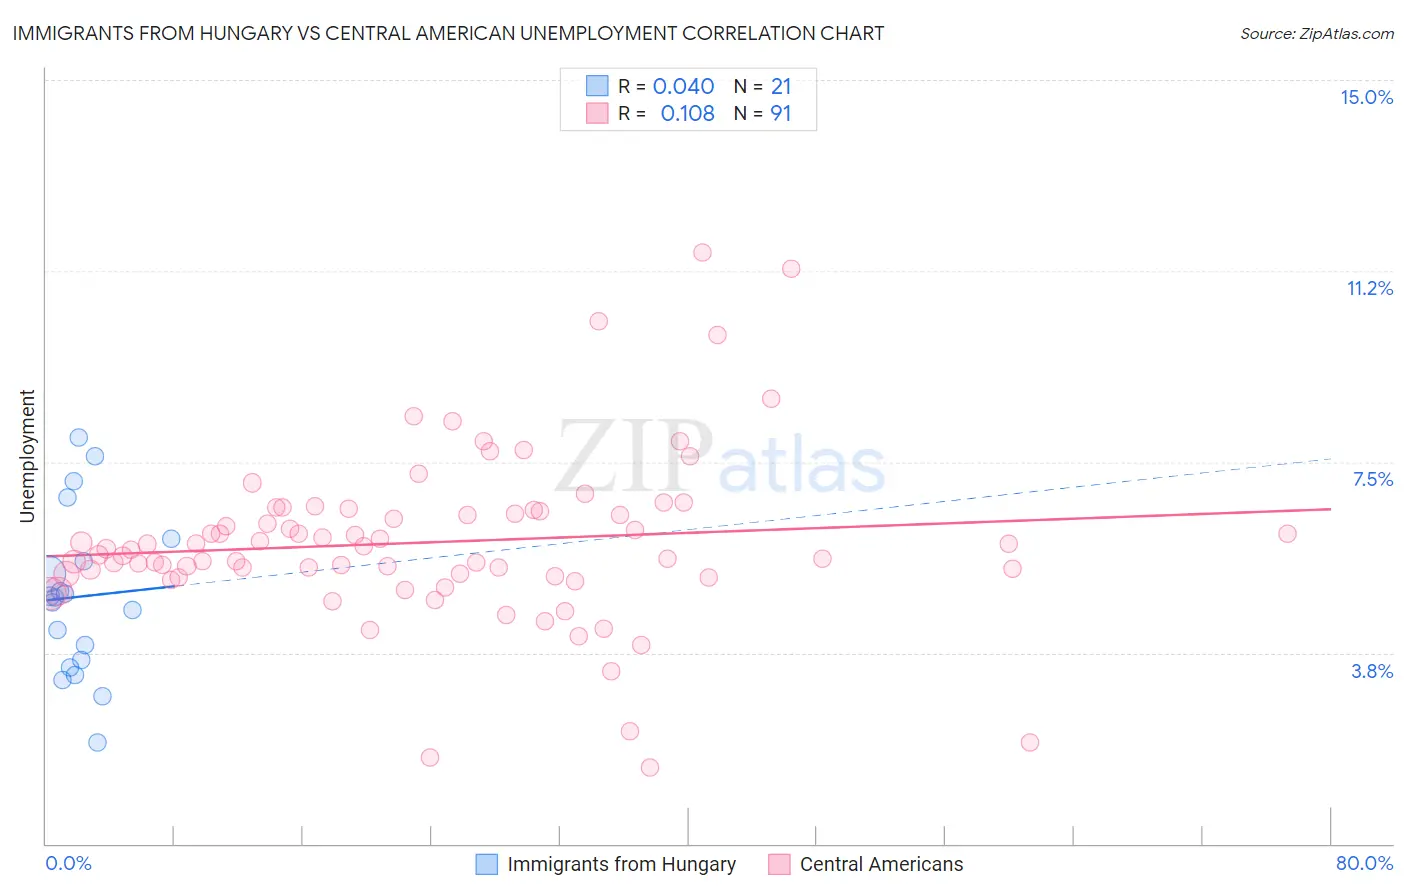 Immigrants from Hungary vs Central American Unemployment